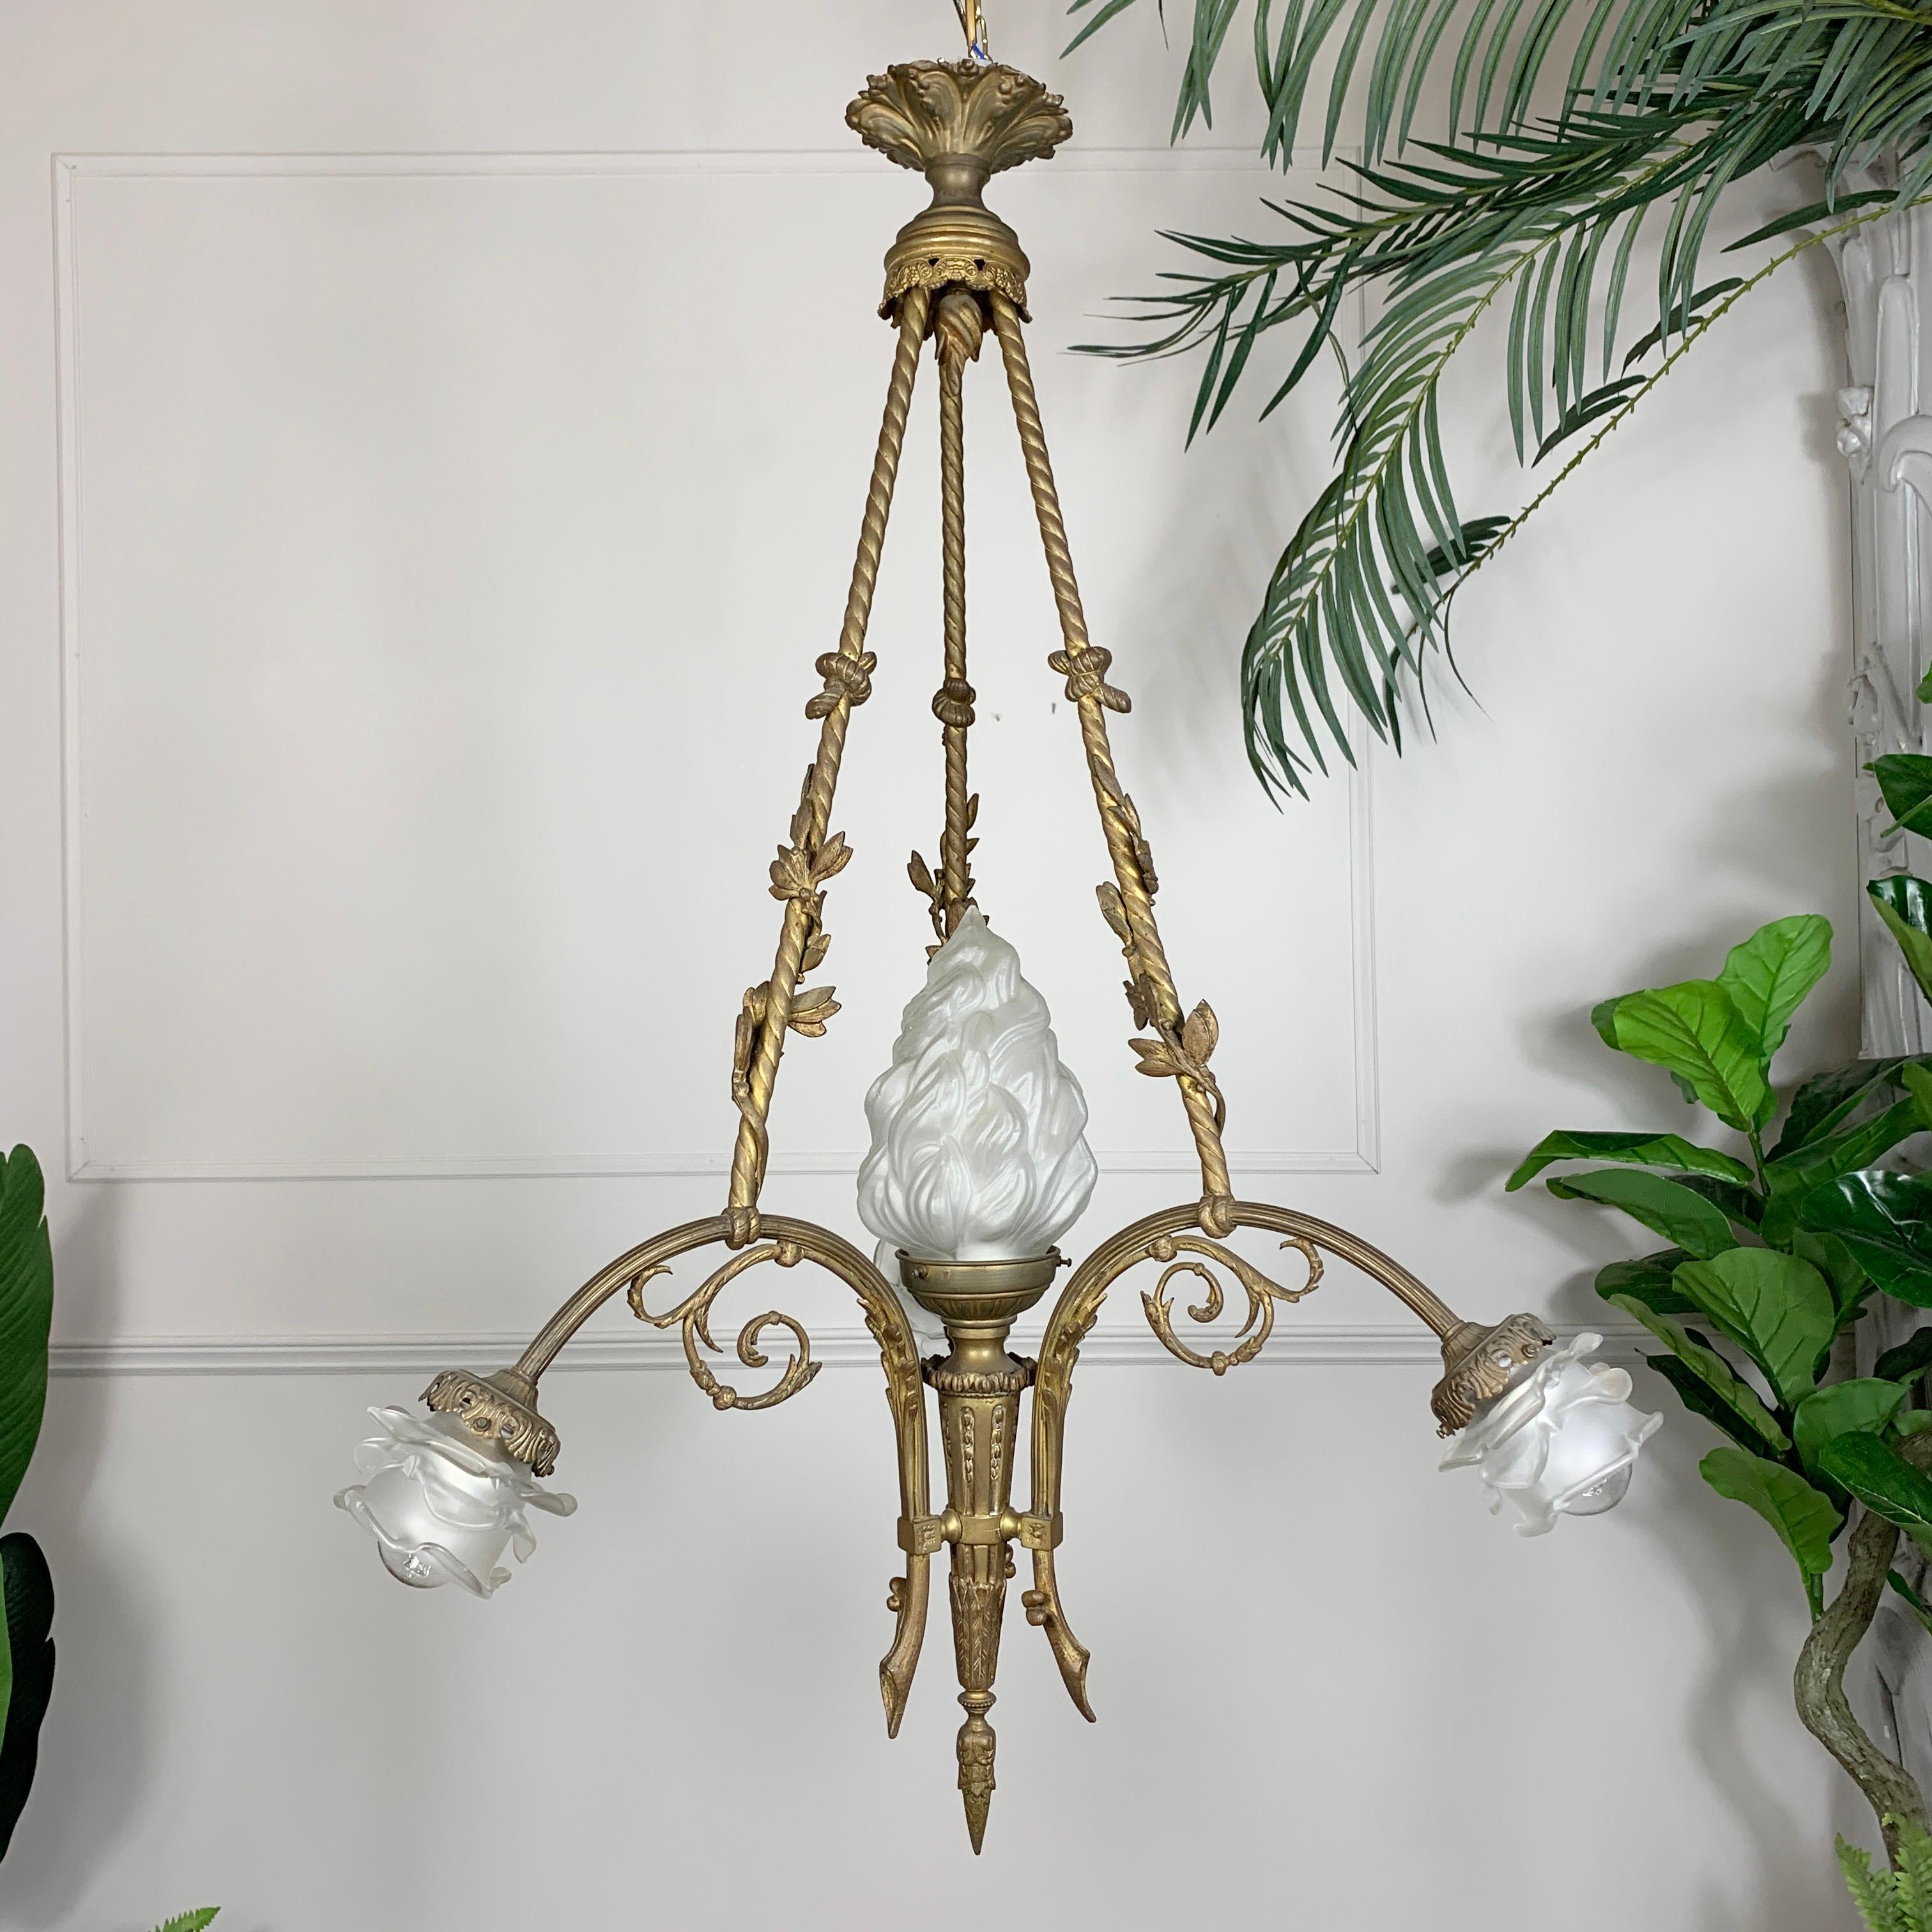 20th Century Art Nouveau Bronze and Crystal Torchiere & Flower Chandelier For Sale